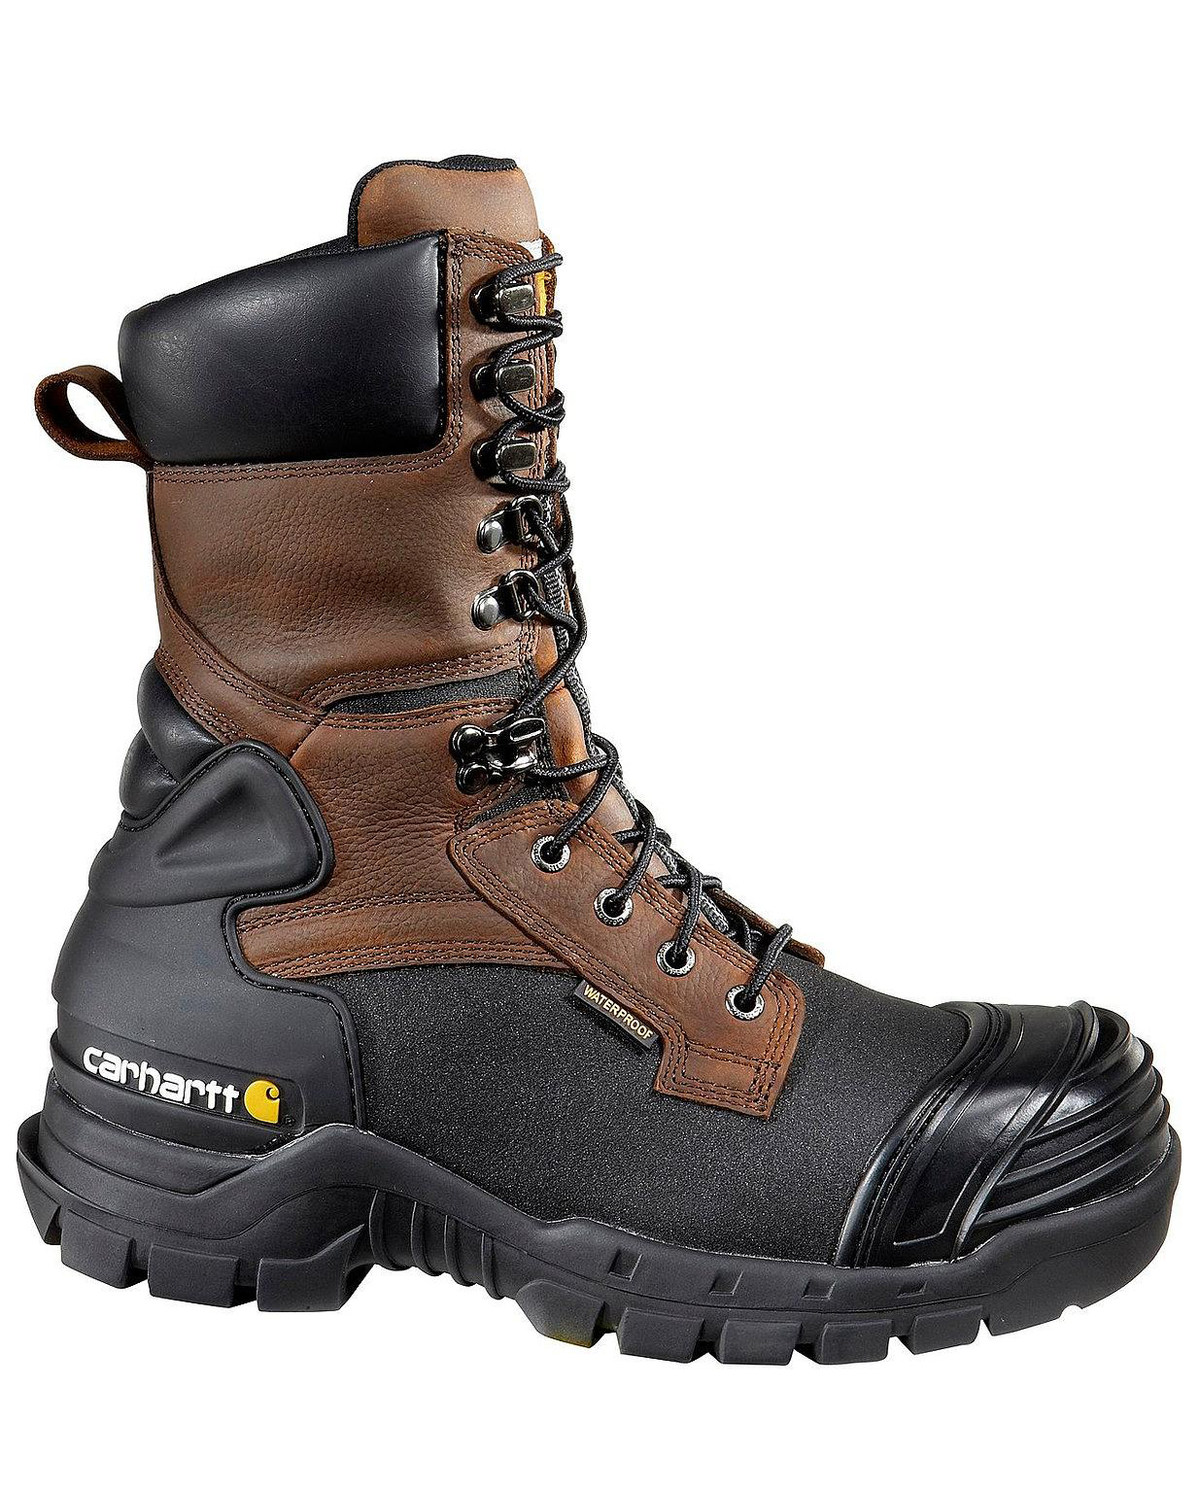 Carhartt 10" Waterproof Insulated Pac Boots - Composite Toe